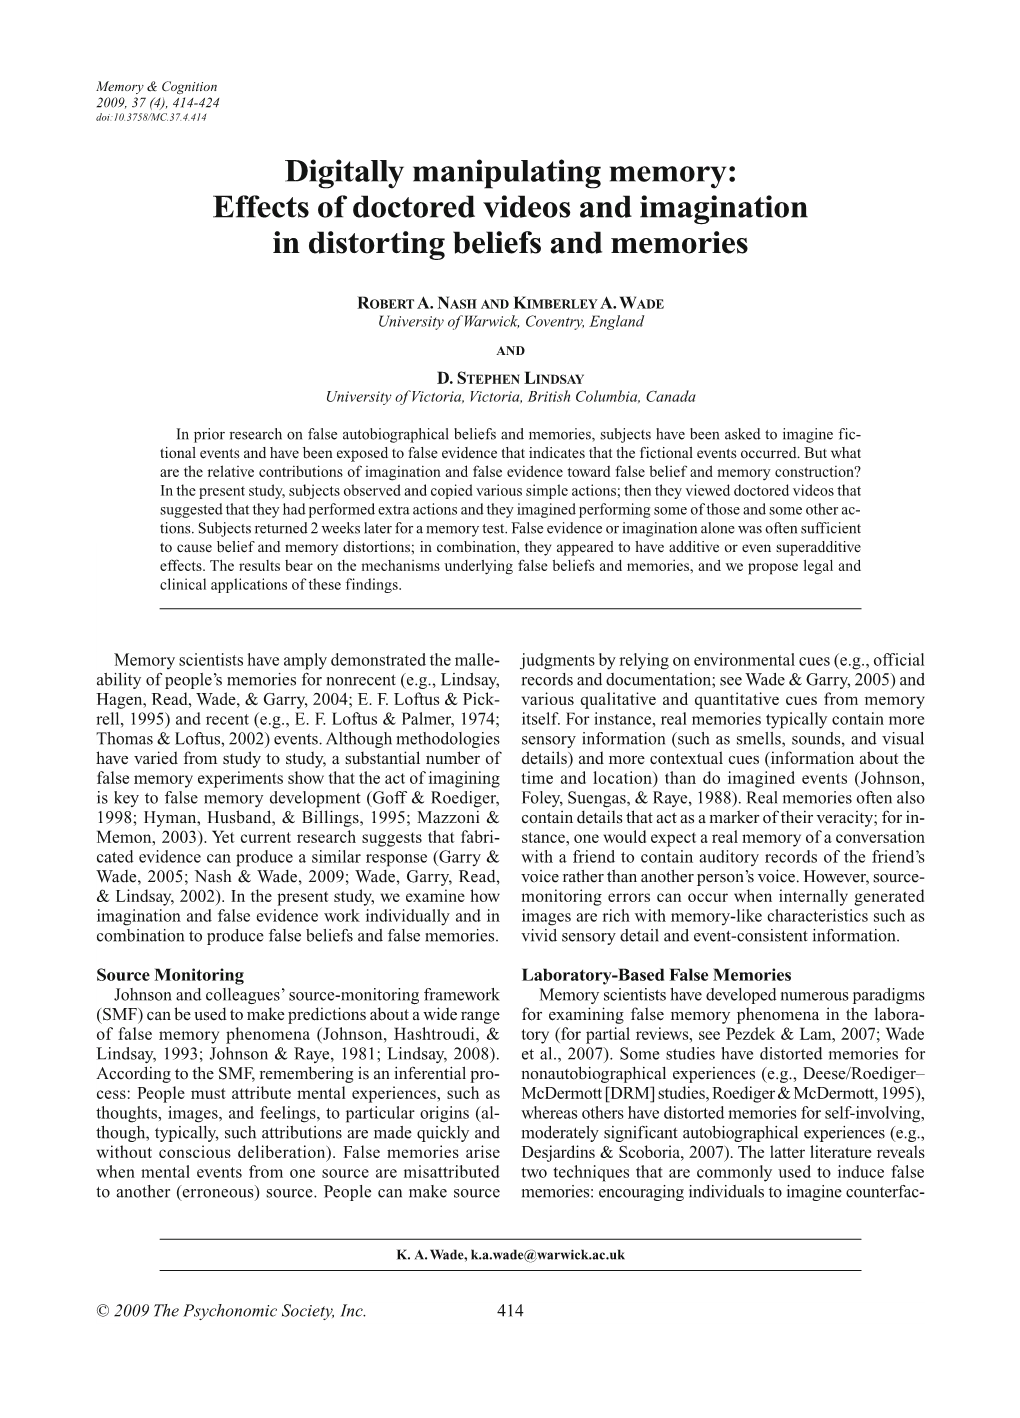 Digitally Manipulating Memory: Effects of Doctored Videos and Imagination in Distorting Beliefs and Memories